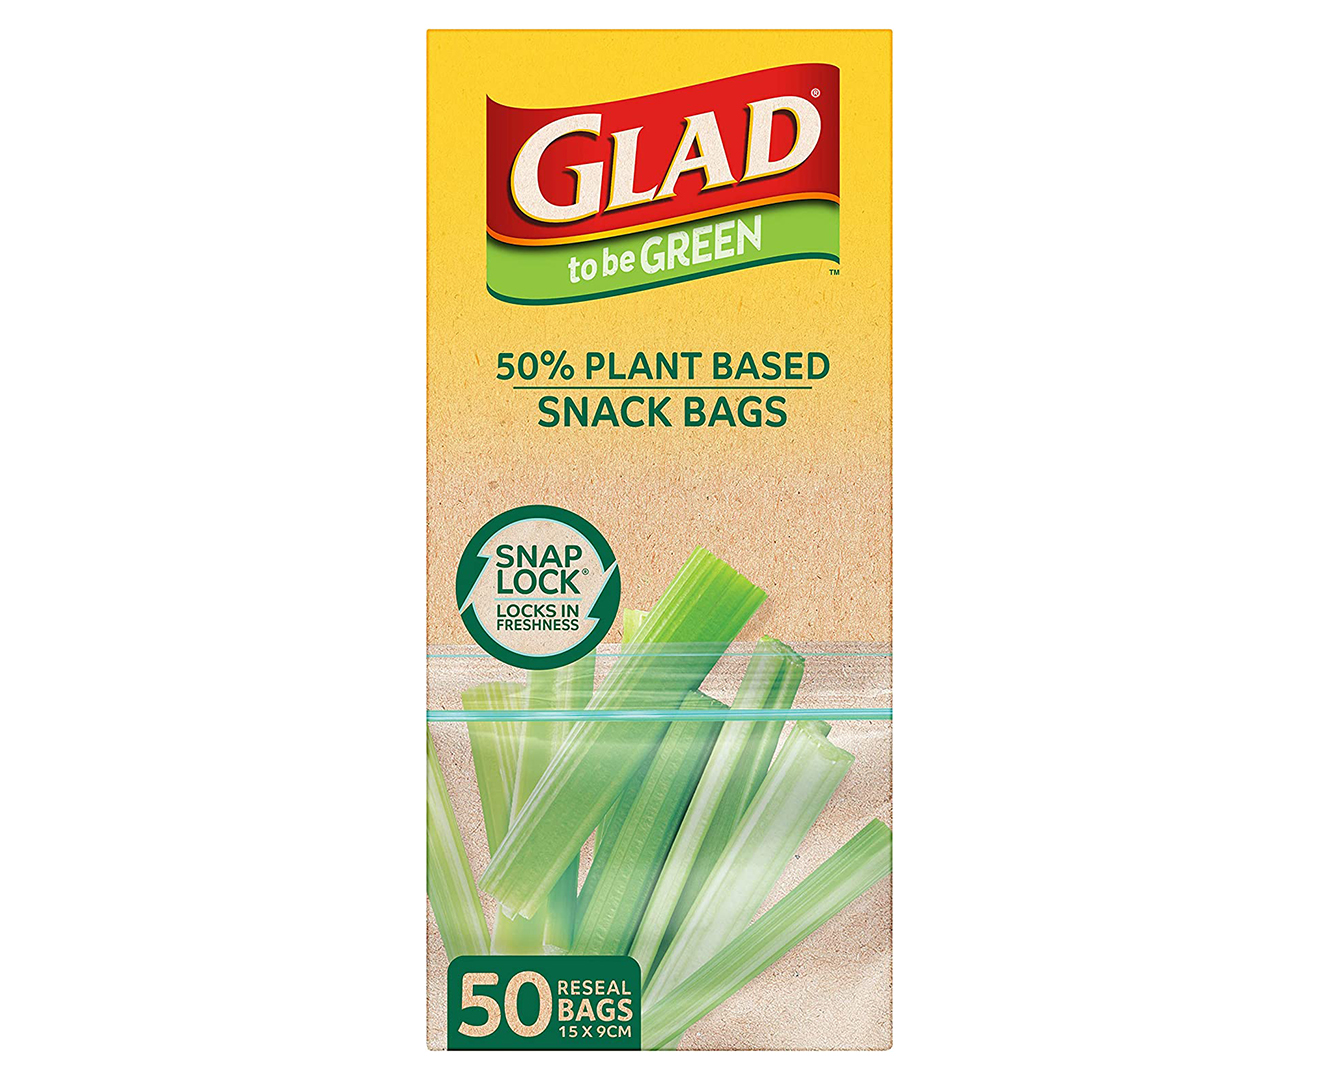 2 x 50pk Glad to be Green Snap Lock Plant Based Resealable Snack Bags